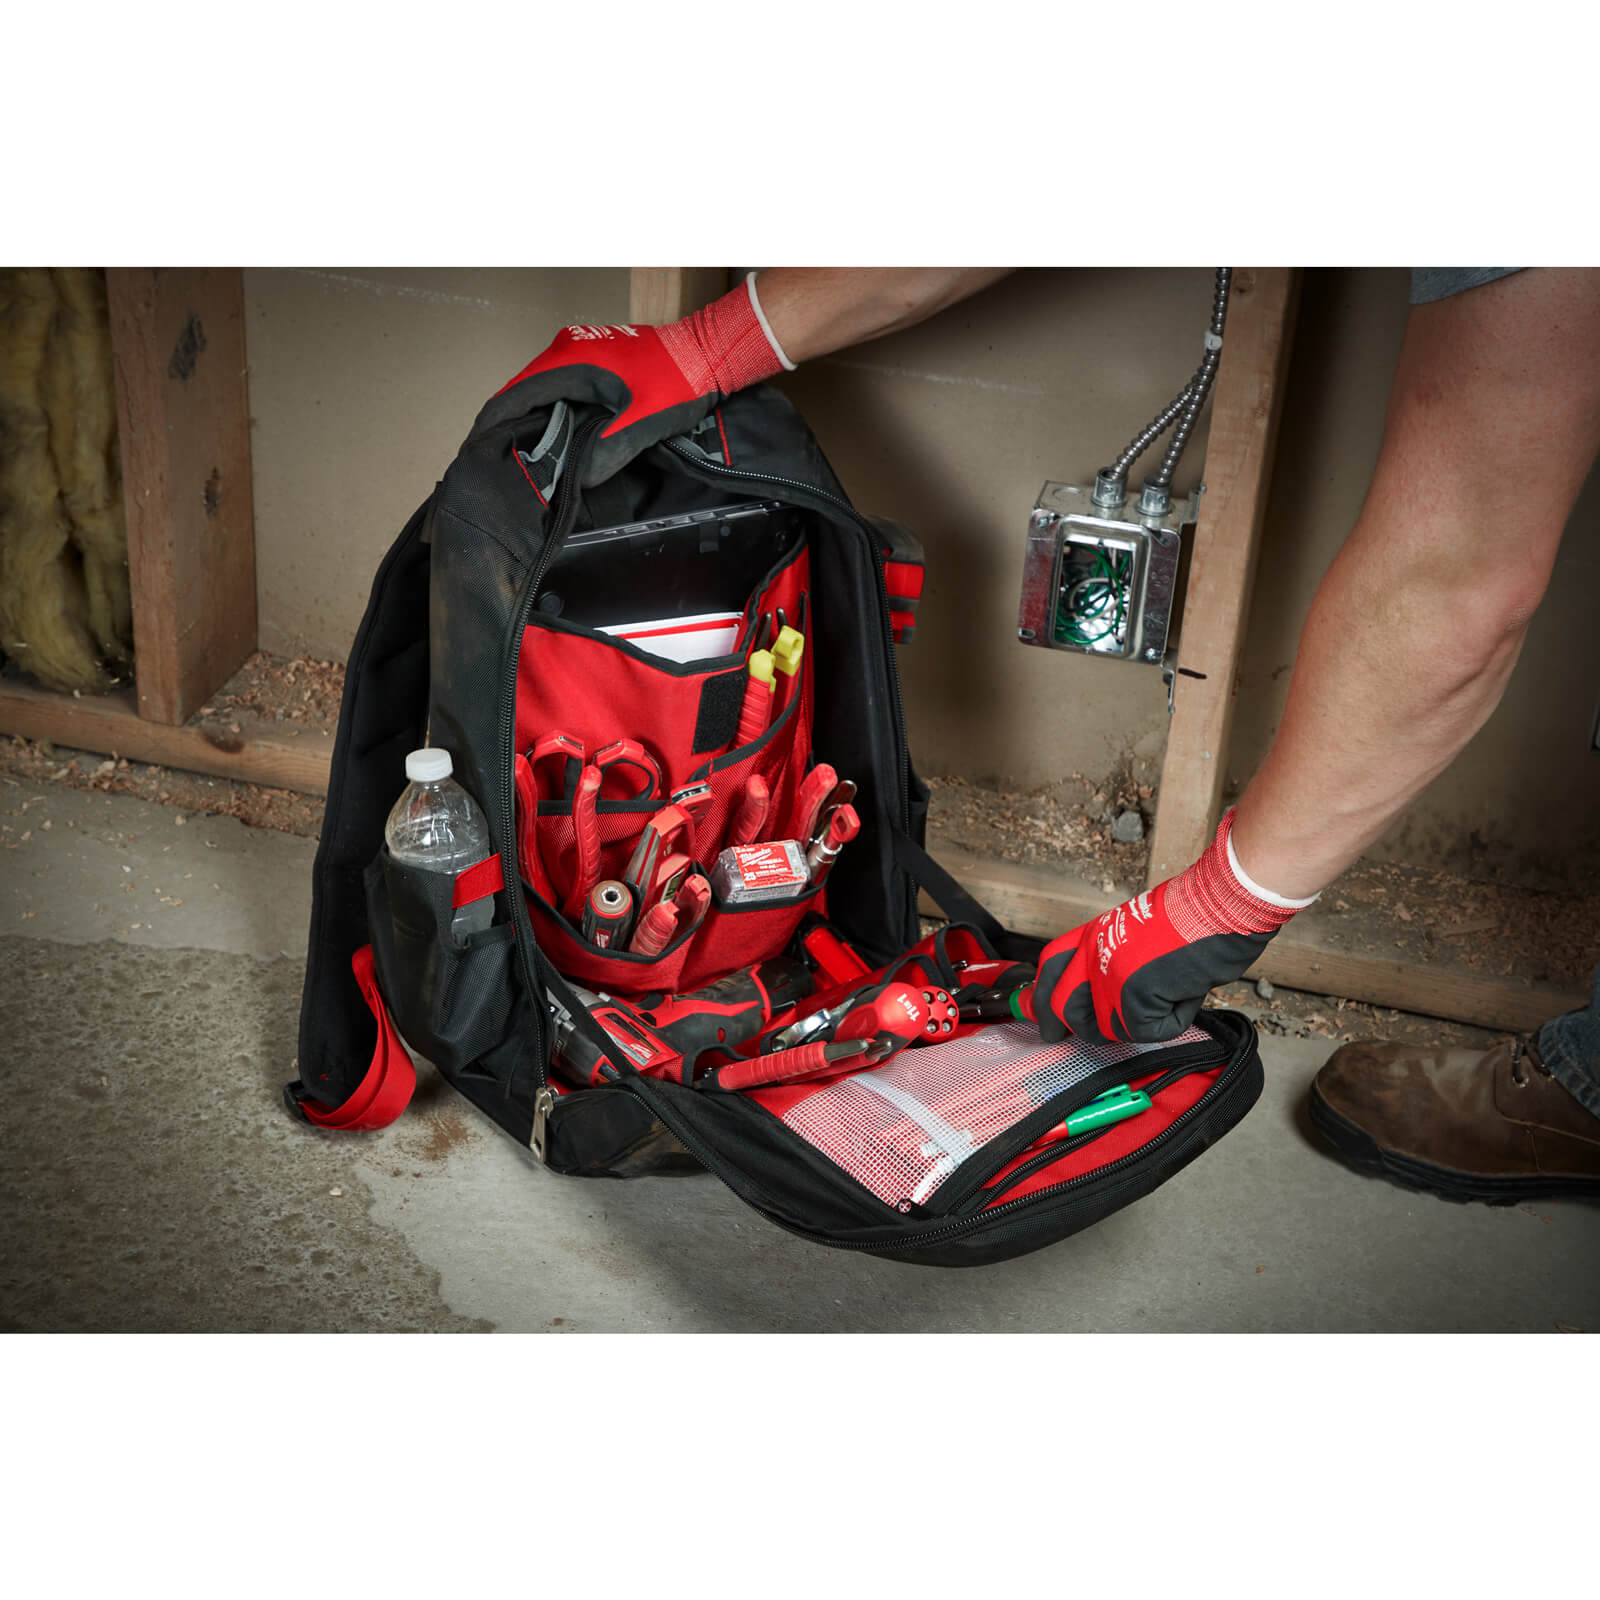 Milwaukee Backpack Review - Tools In Action - Power Tool Reviews